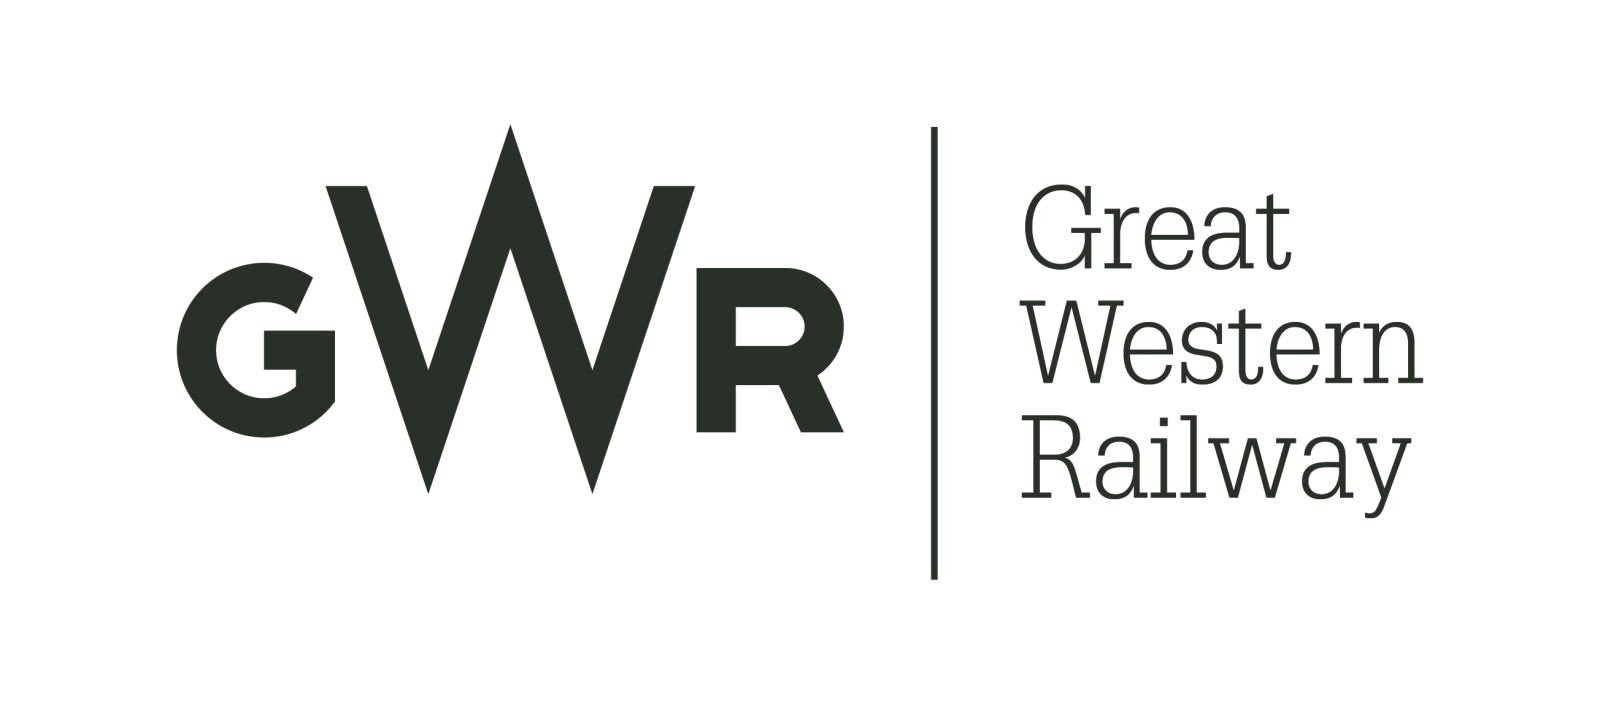 Book your train at GWR.com